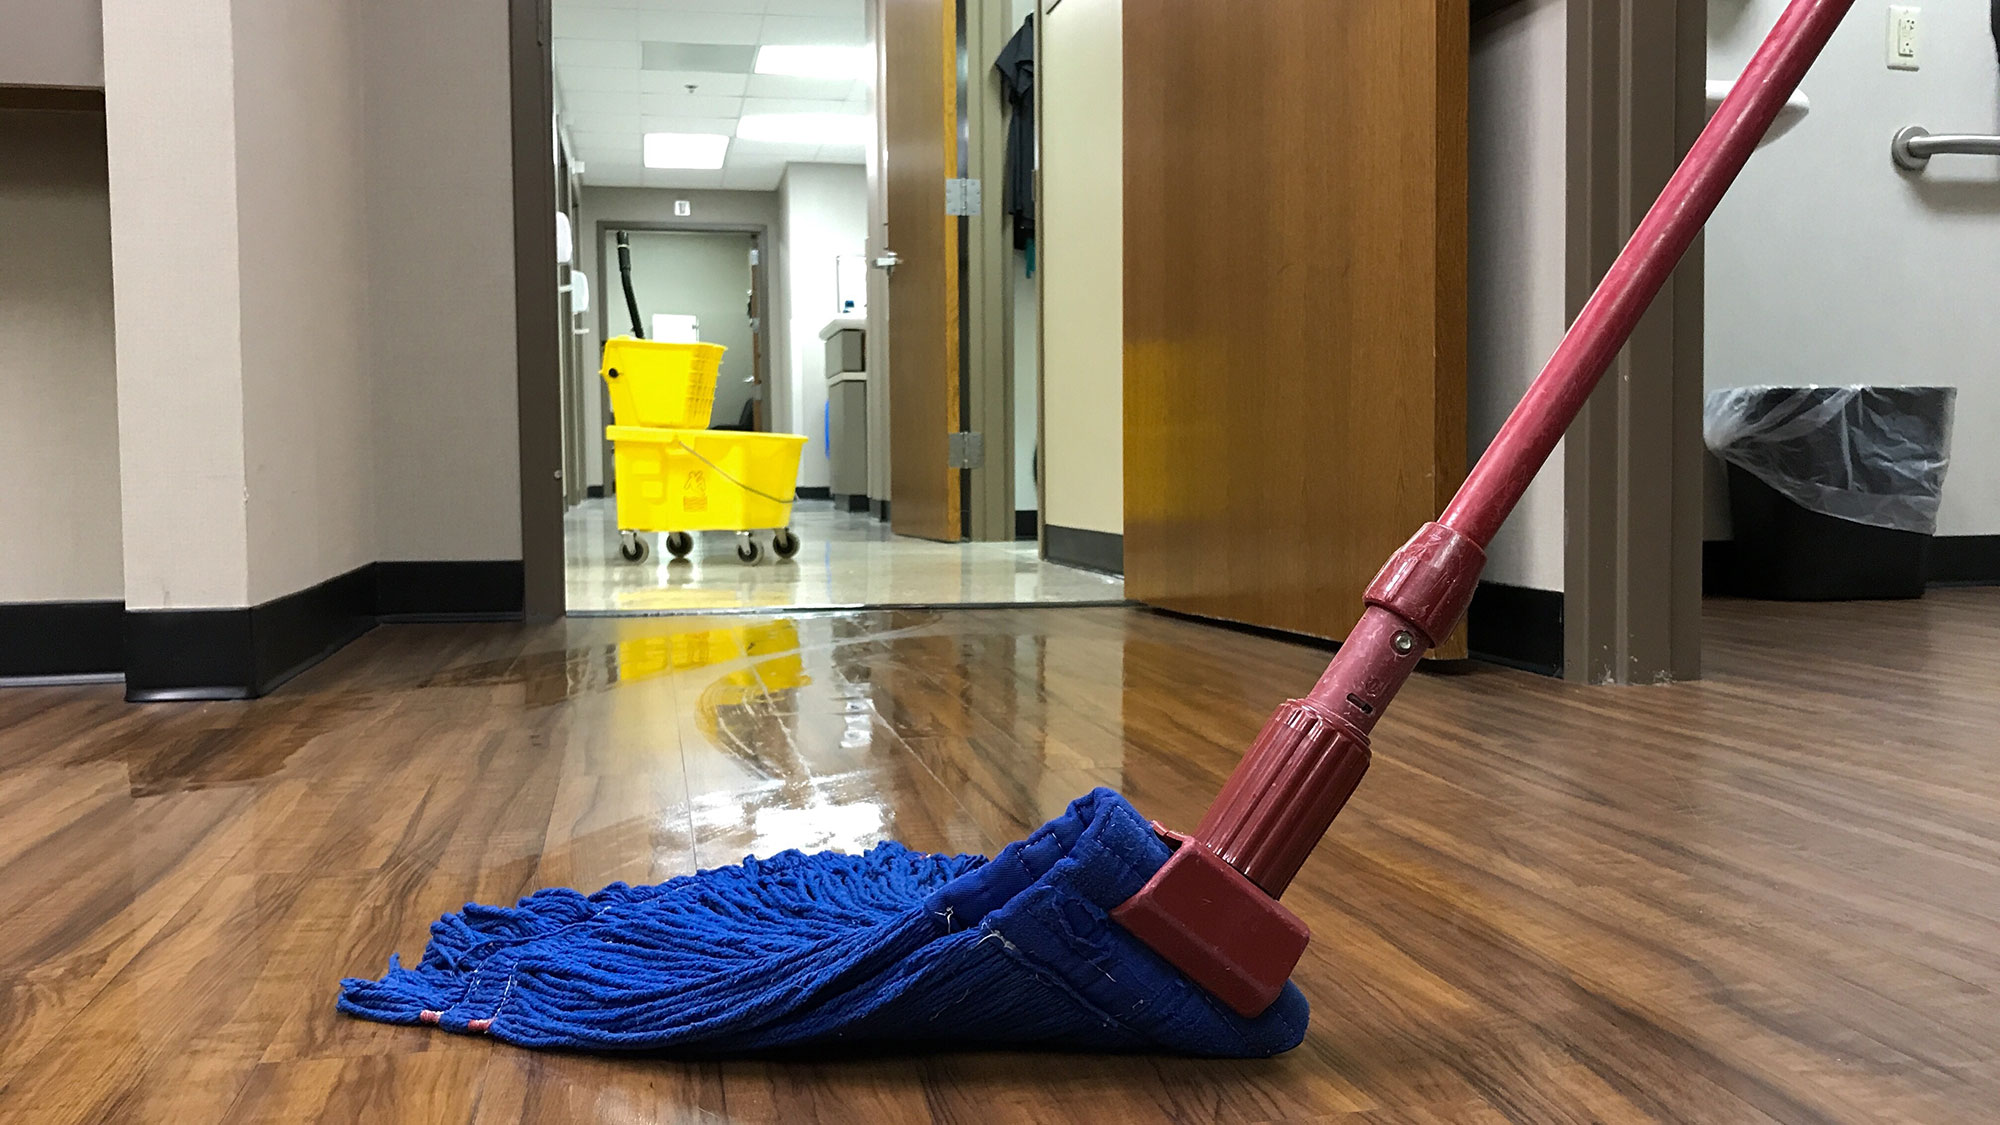 The wrong cleaning process or tools can make your floor slippery